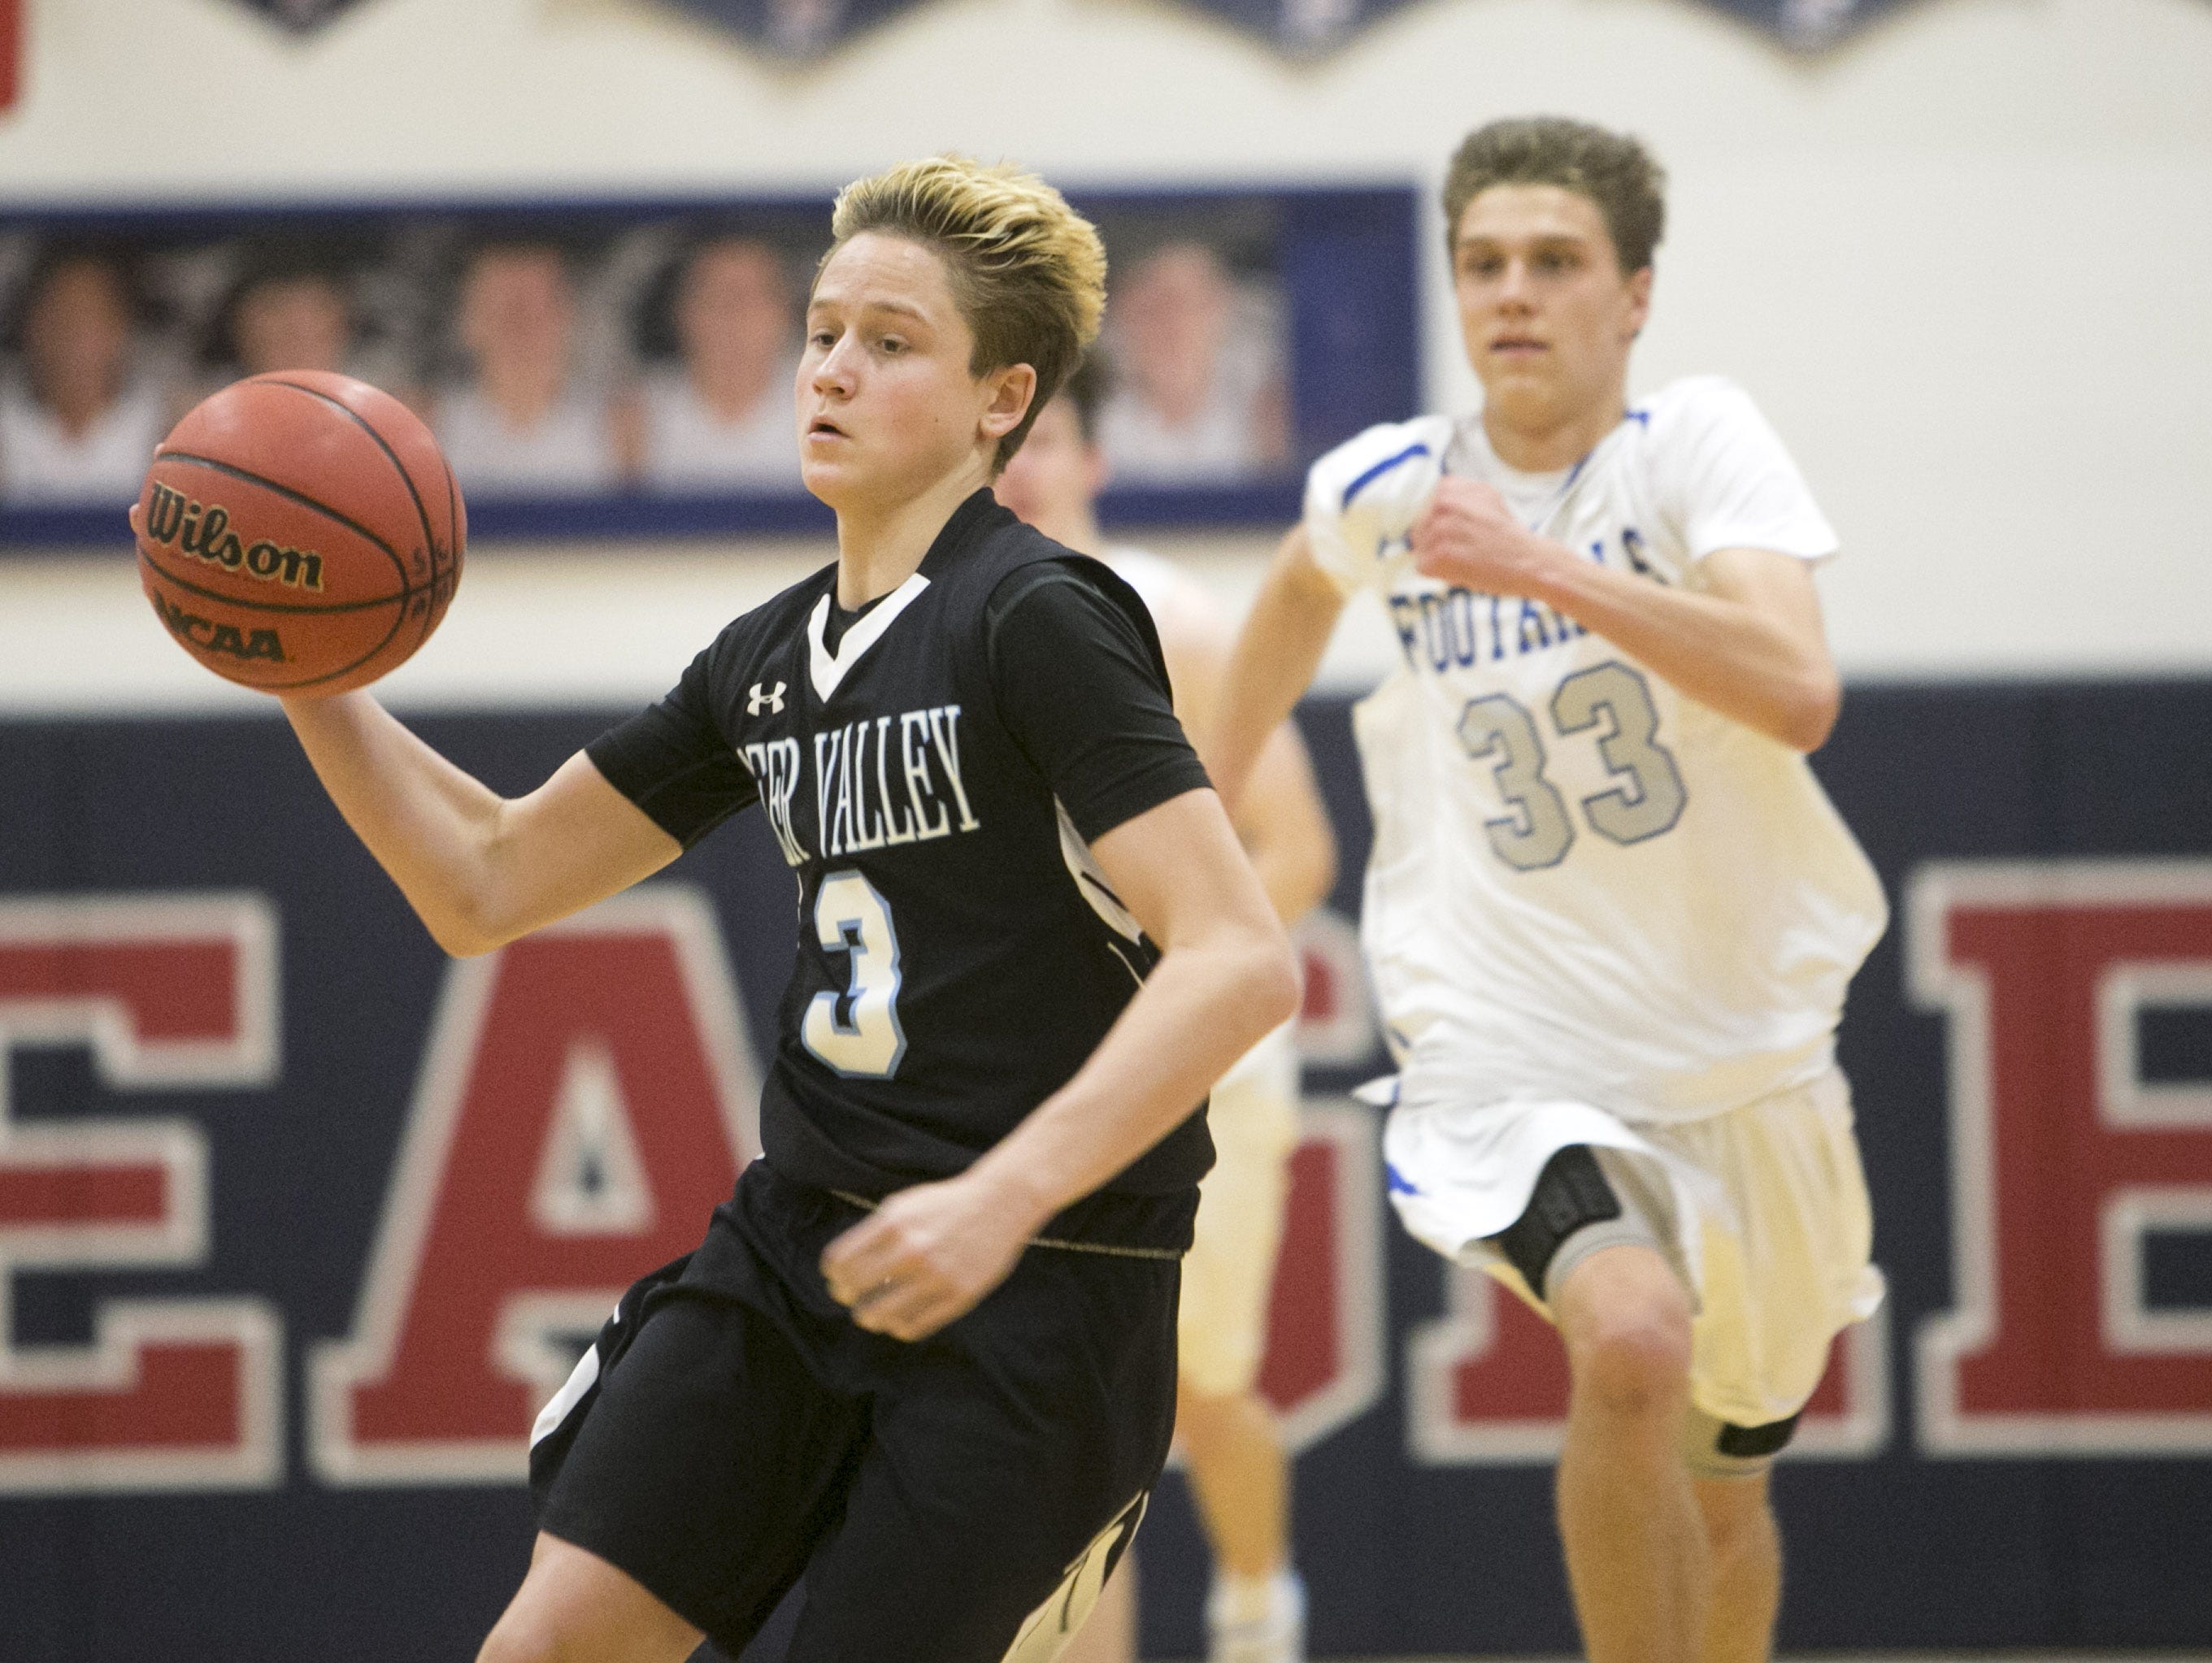 Deer Valley's Deven Breckner dribbles in front of Catalina Foothills' Hayden Moser during the boys basketball game at Scottsdale Christian Academy on Friday, Dec. 30, 2016.